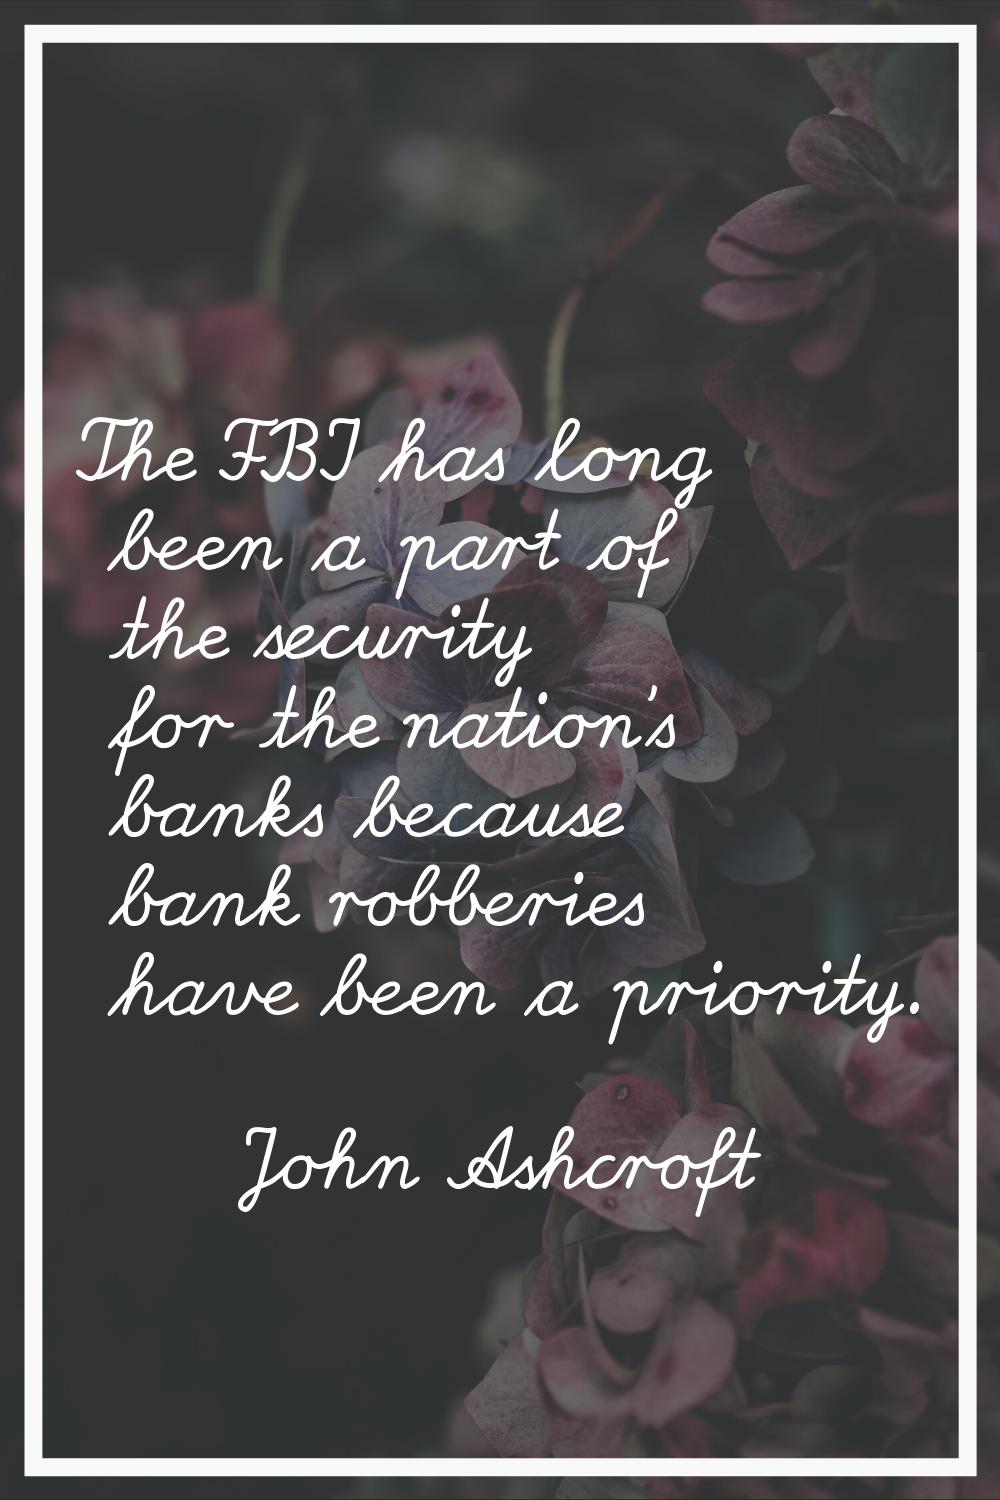 The FBI has long been a part of the security for the nation's banks because bank robberies have bee